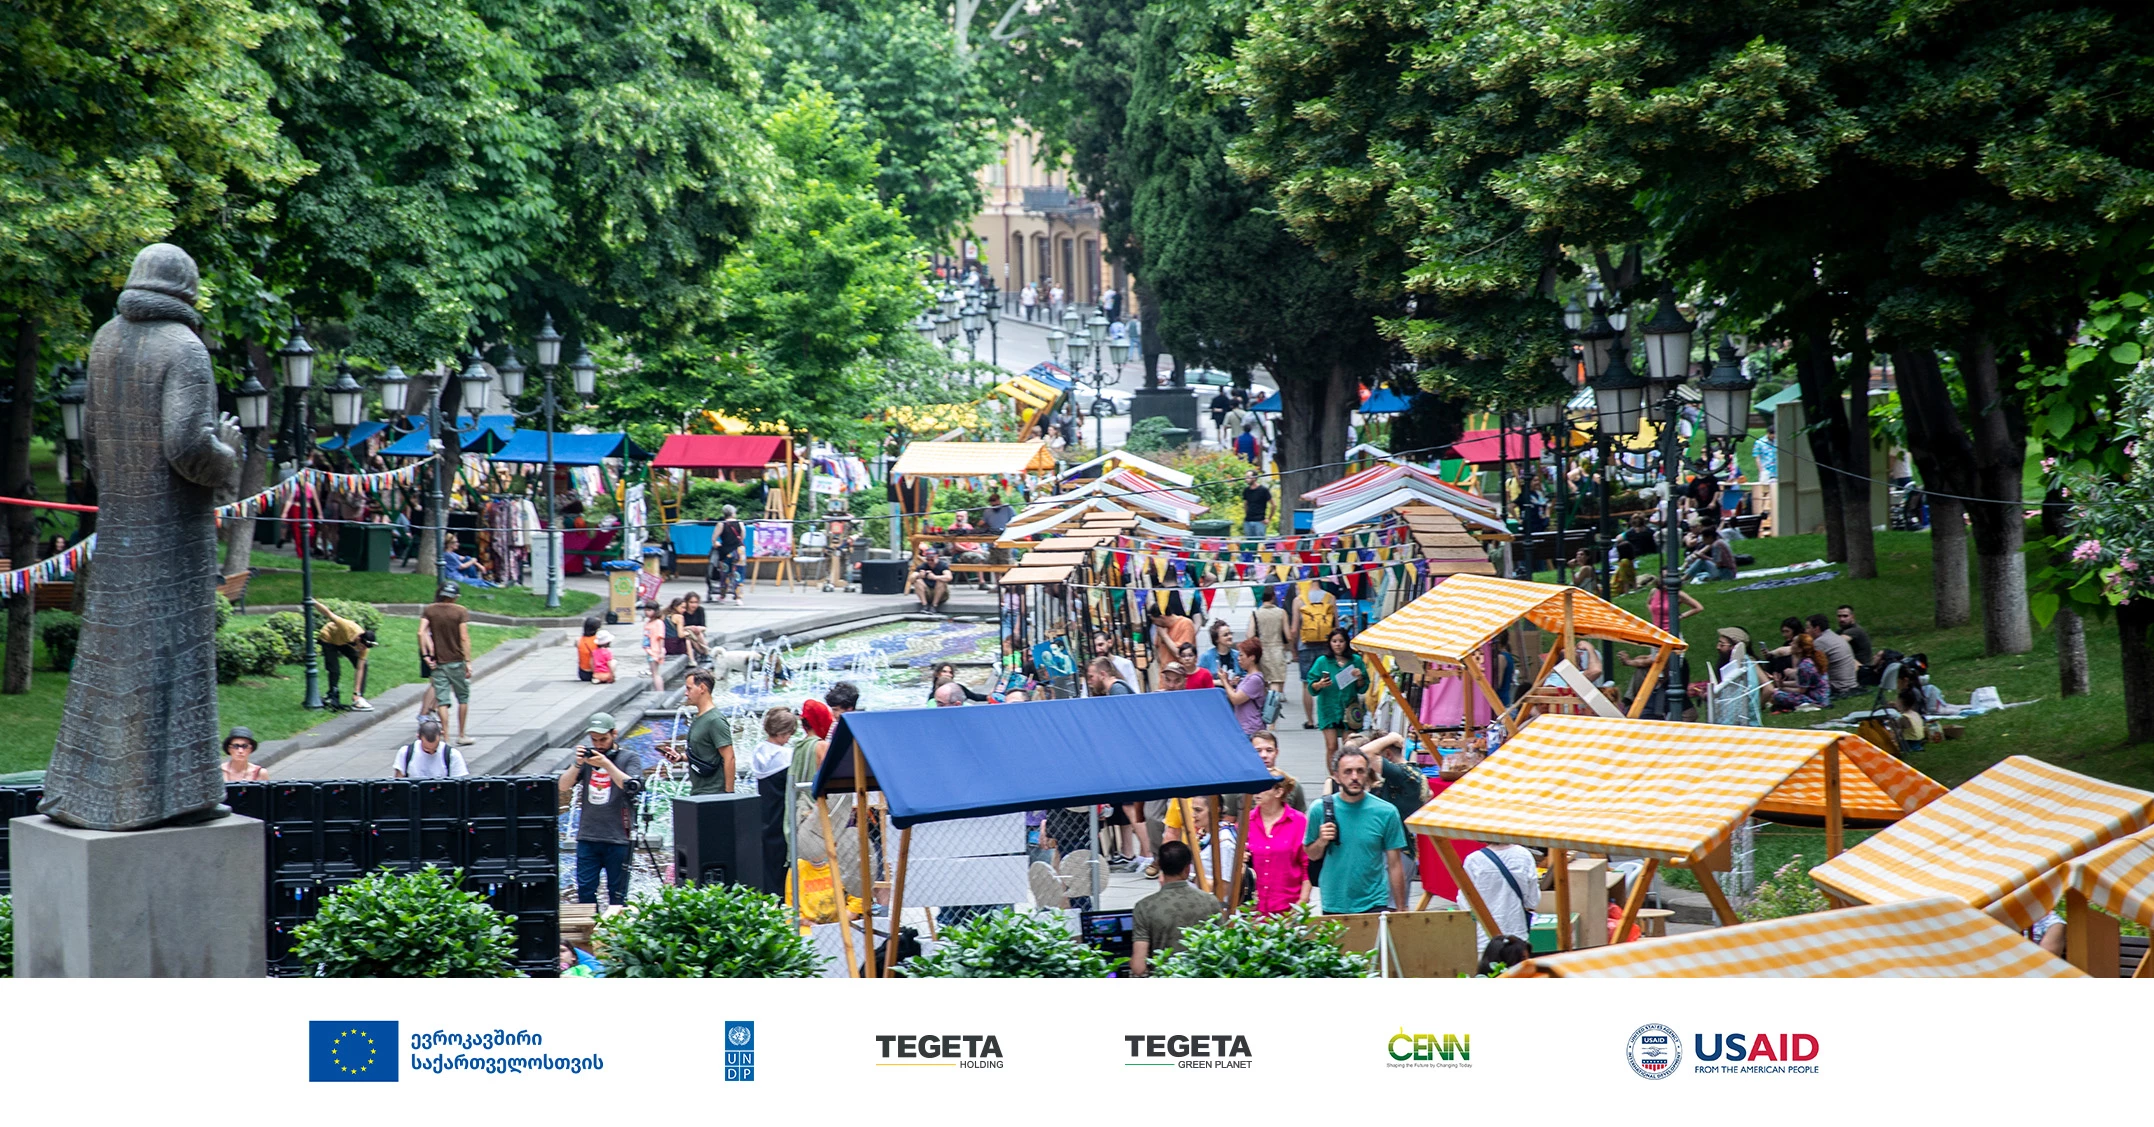 With the support of “Tegeta Holding” and “Tegeta Green Planet”, Green Market - a social festival was held